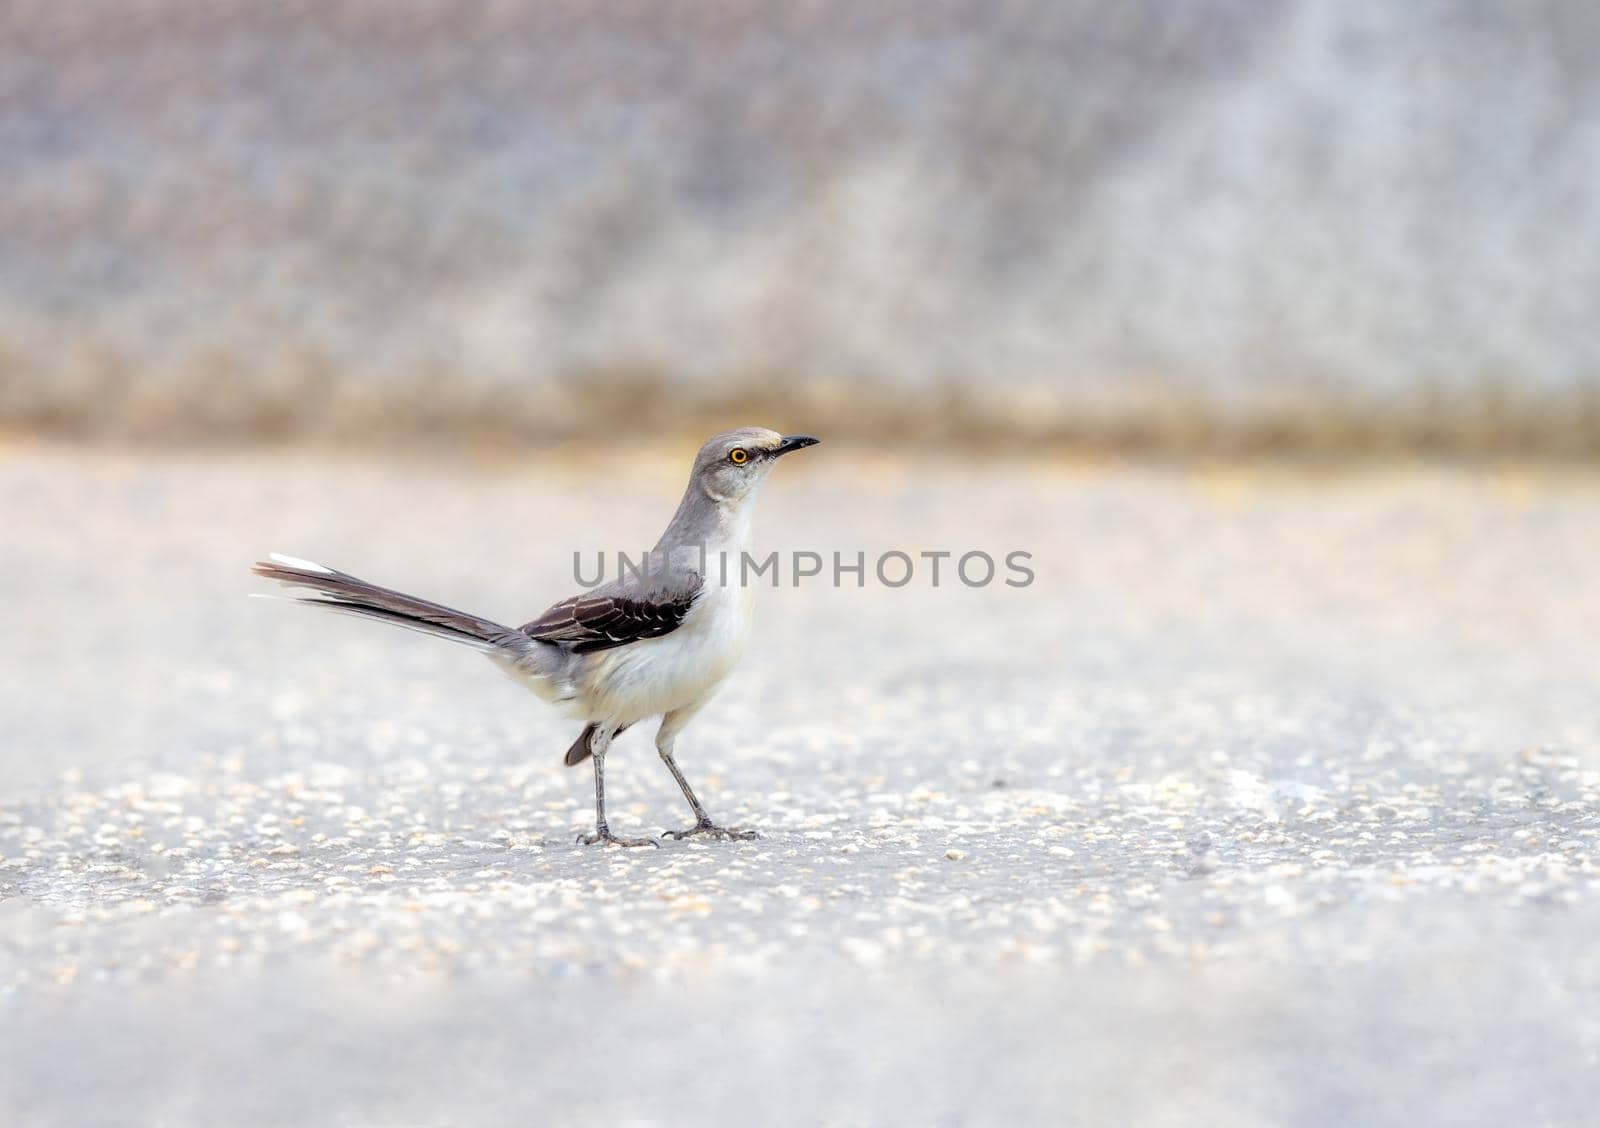 Northern Mockingbird foraging on the ground in Cancun Mexico